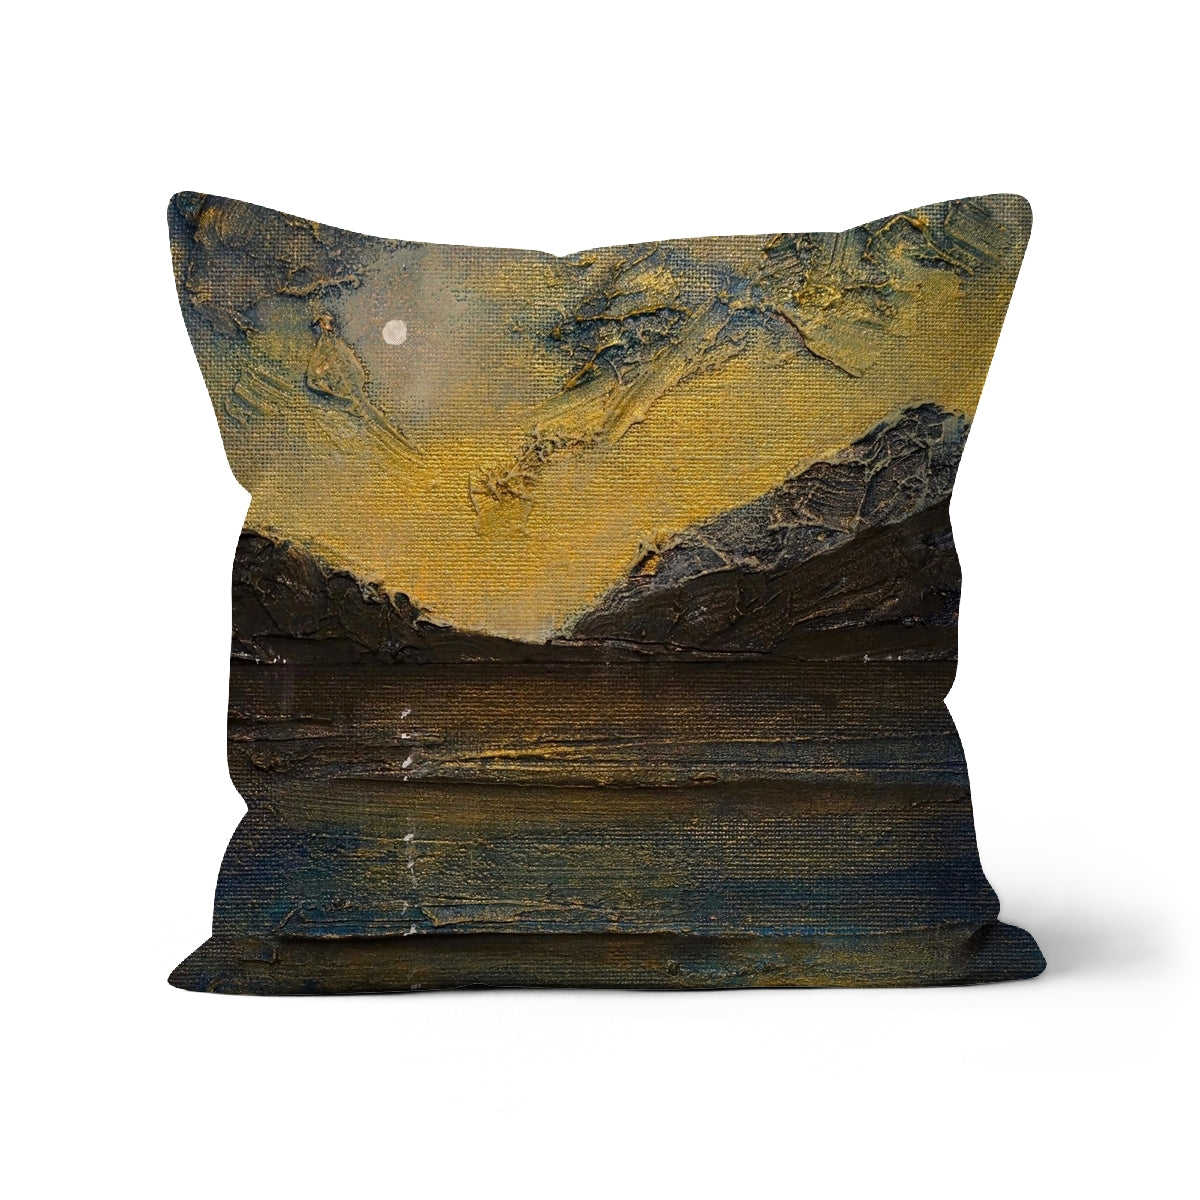 Loch Lomond Moonlight Art Gifts Cushion-Cushions-Scottish Lochs & Mountains Art Gallery-Canvas-12"x12"-Paintings, Prints, Homeware, Art Gifts From Scotland By Scottish Artist Kevin Hunter